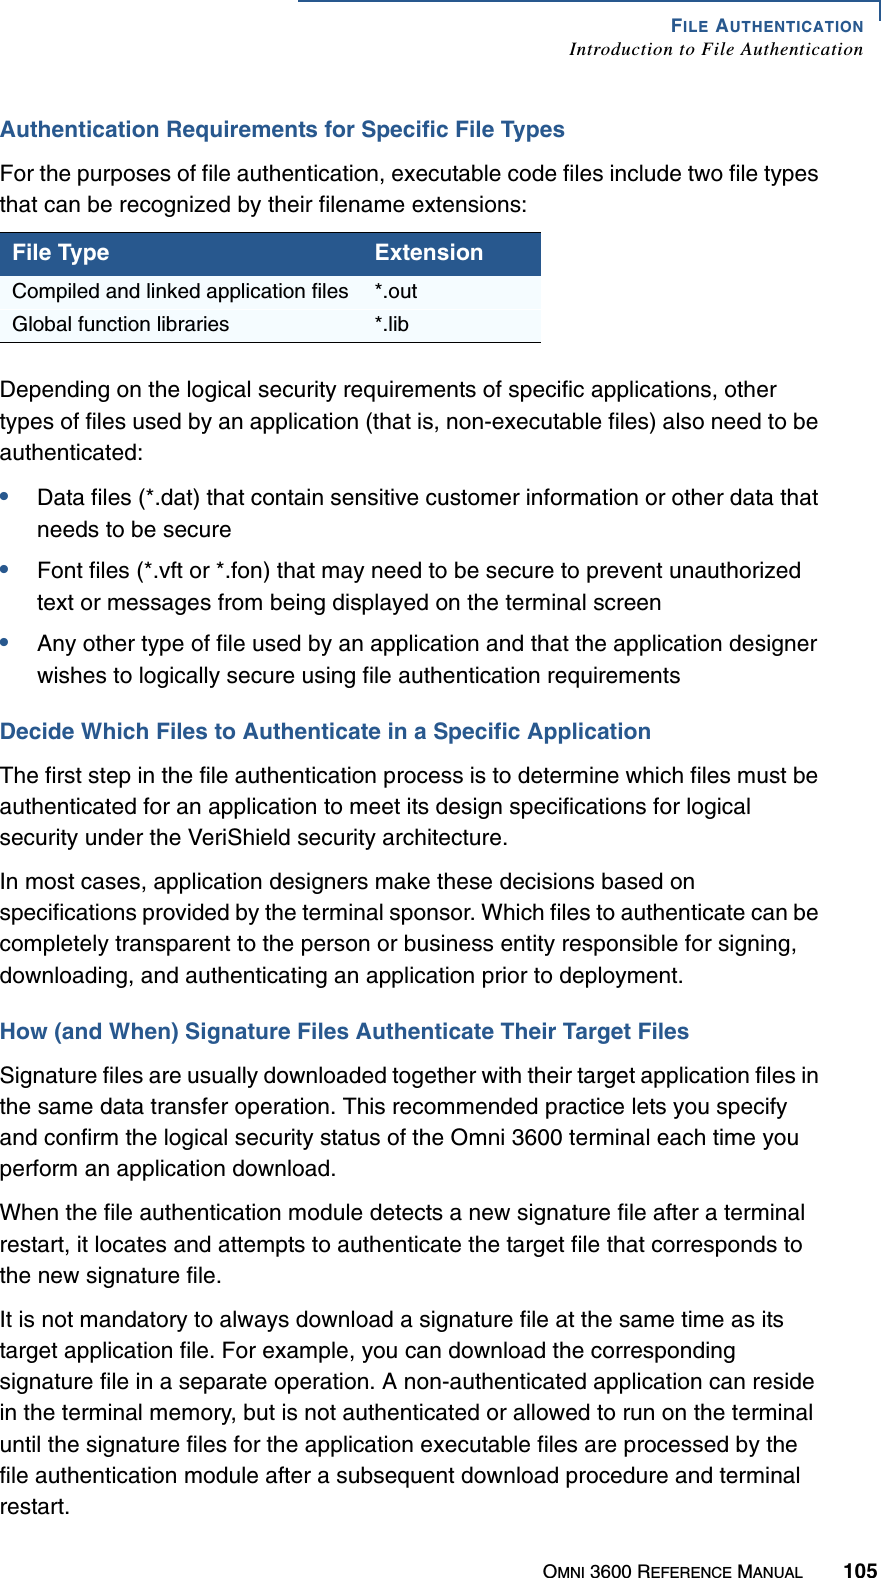 FILE AUTHENTICATIONIntroduction to File AuthenticationOMNI 3600 REFERENCE MANUAL 105Authentication Requirements for Specific File TypesFor the purposes of file authentication, executable code files include two file types that can be recognized by their filename extensions:Depending on the logical security requirements of specific applications, other types of files used by an application (that is, non-executable files) also need to be authenticated:•Data files (*.dat) that contain sensitive customer information or other data that needs to be secure•Font files (*.vft or *.fon) that may need to be secure to prevent unauthorized text or messages from being displayed on the terminal screen•Any other type of file used by an application and that the application designer wishes to logically secure using file authentication requirementsDecide Which Files to Authenticate in a Specific ApplicationThe first step in the file authentication process is to determine which files must be authenticated for an application to meet its design specifications for logical security under the VeriShield security architecture.In most cases, application designers make these decisions based on specifications provided by the terminal sponsor. Which files to authenticate can be completely transparent to the person or business entity responsible for signing, downloading, and authenticating an application prior to deployment.How (and When) Signature Files Authenticate Their Target FilesSignature files are usually downloaded together with their target application files in the same data transfer operation. This recommended practice lets you specify and confirm the logical security status of the Omni 3600 terminal each time you perform an application download.When the file authentication module detects a new signature file after a terminal restart, it locates and attempts to authenticate the target file that corresponds to the new signature file.It is not mandatory to always download a signature file at the same time as its target application file. For example, you can download the corresponding signature file in a separate operation. A non-authenticated application can reside in the terminal memory, but is not authenticated or allowed to run on the terminal until the signature files for the application executable files are processed by the file authentication module after a subsequent download procedure and terminal restart.File Type ExtensionCompiled and linked application files *.outGlobal function libraries *.lib